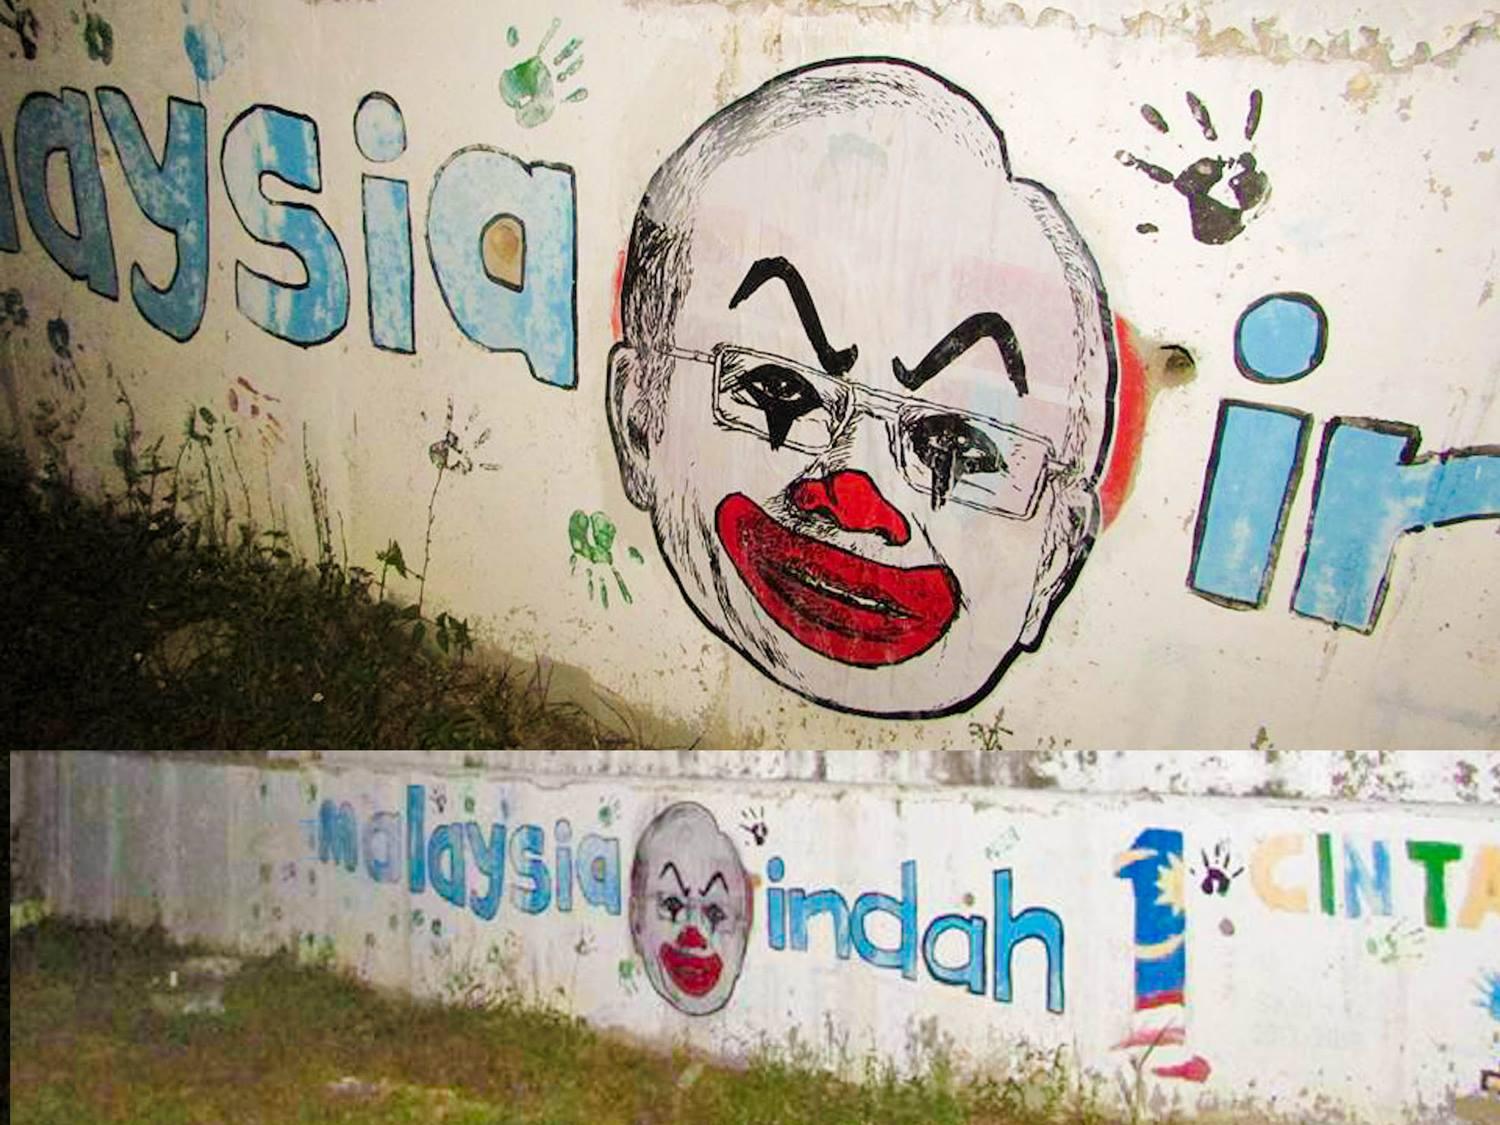 A Malaysian artists's caricatures of  the scandal plagued prime minister as a sinister clown have spurred a wider protest.